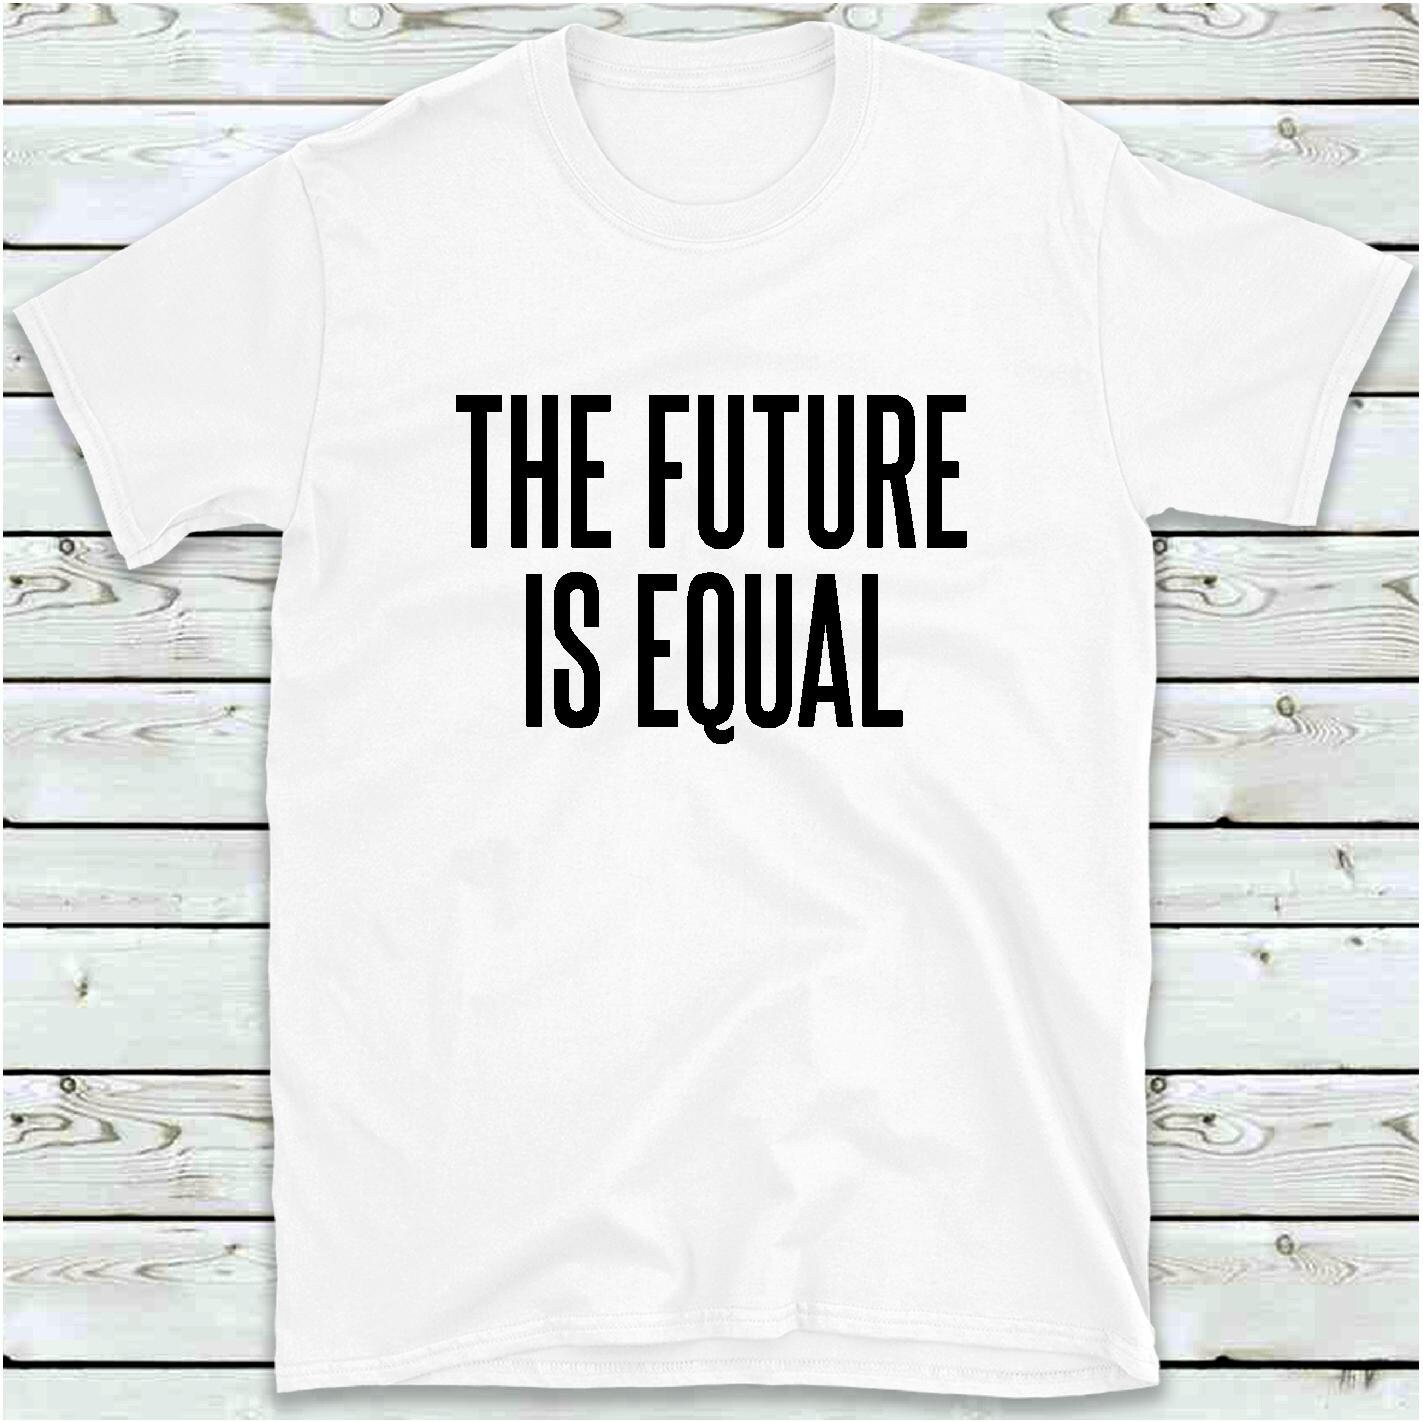 The Future Is Equal T Shirt Equal Rights T-Shirt Women's | Etsy